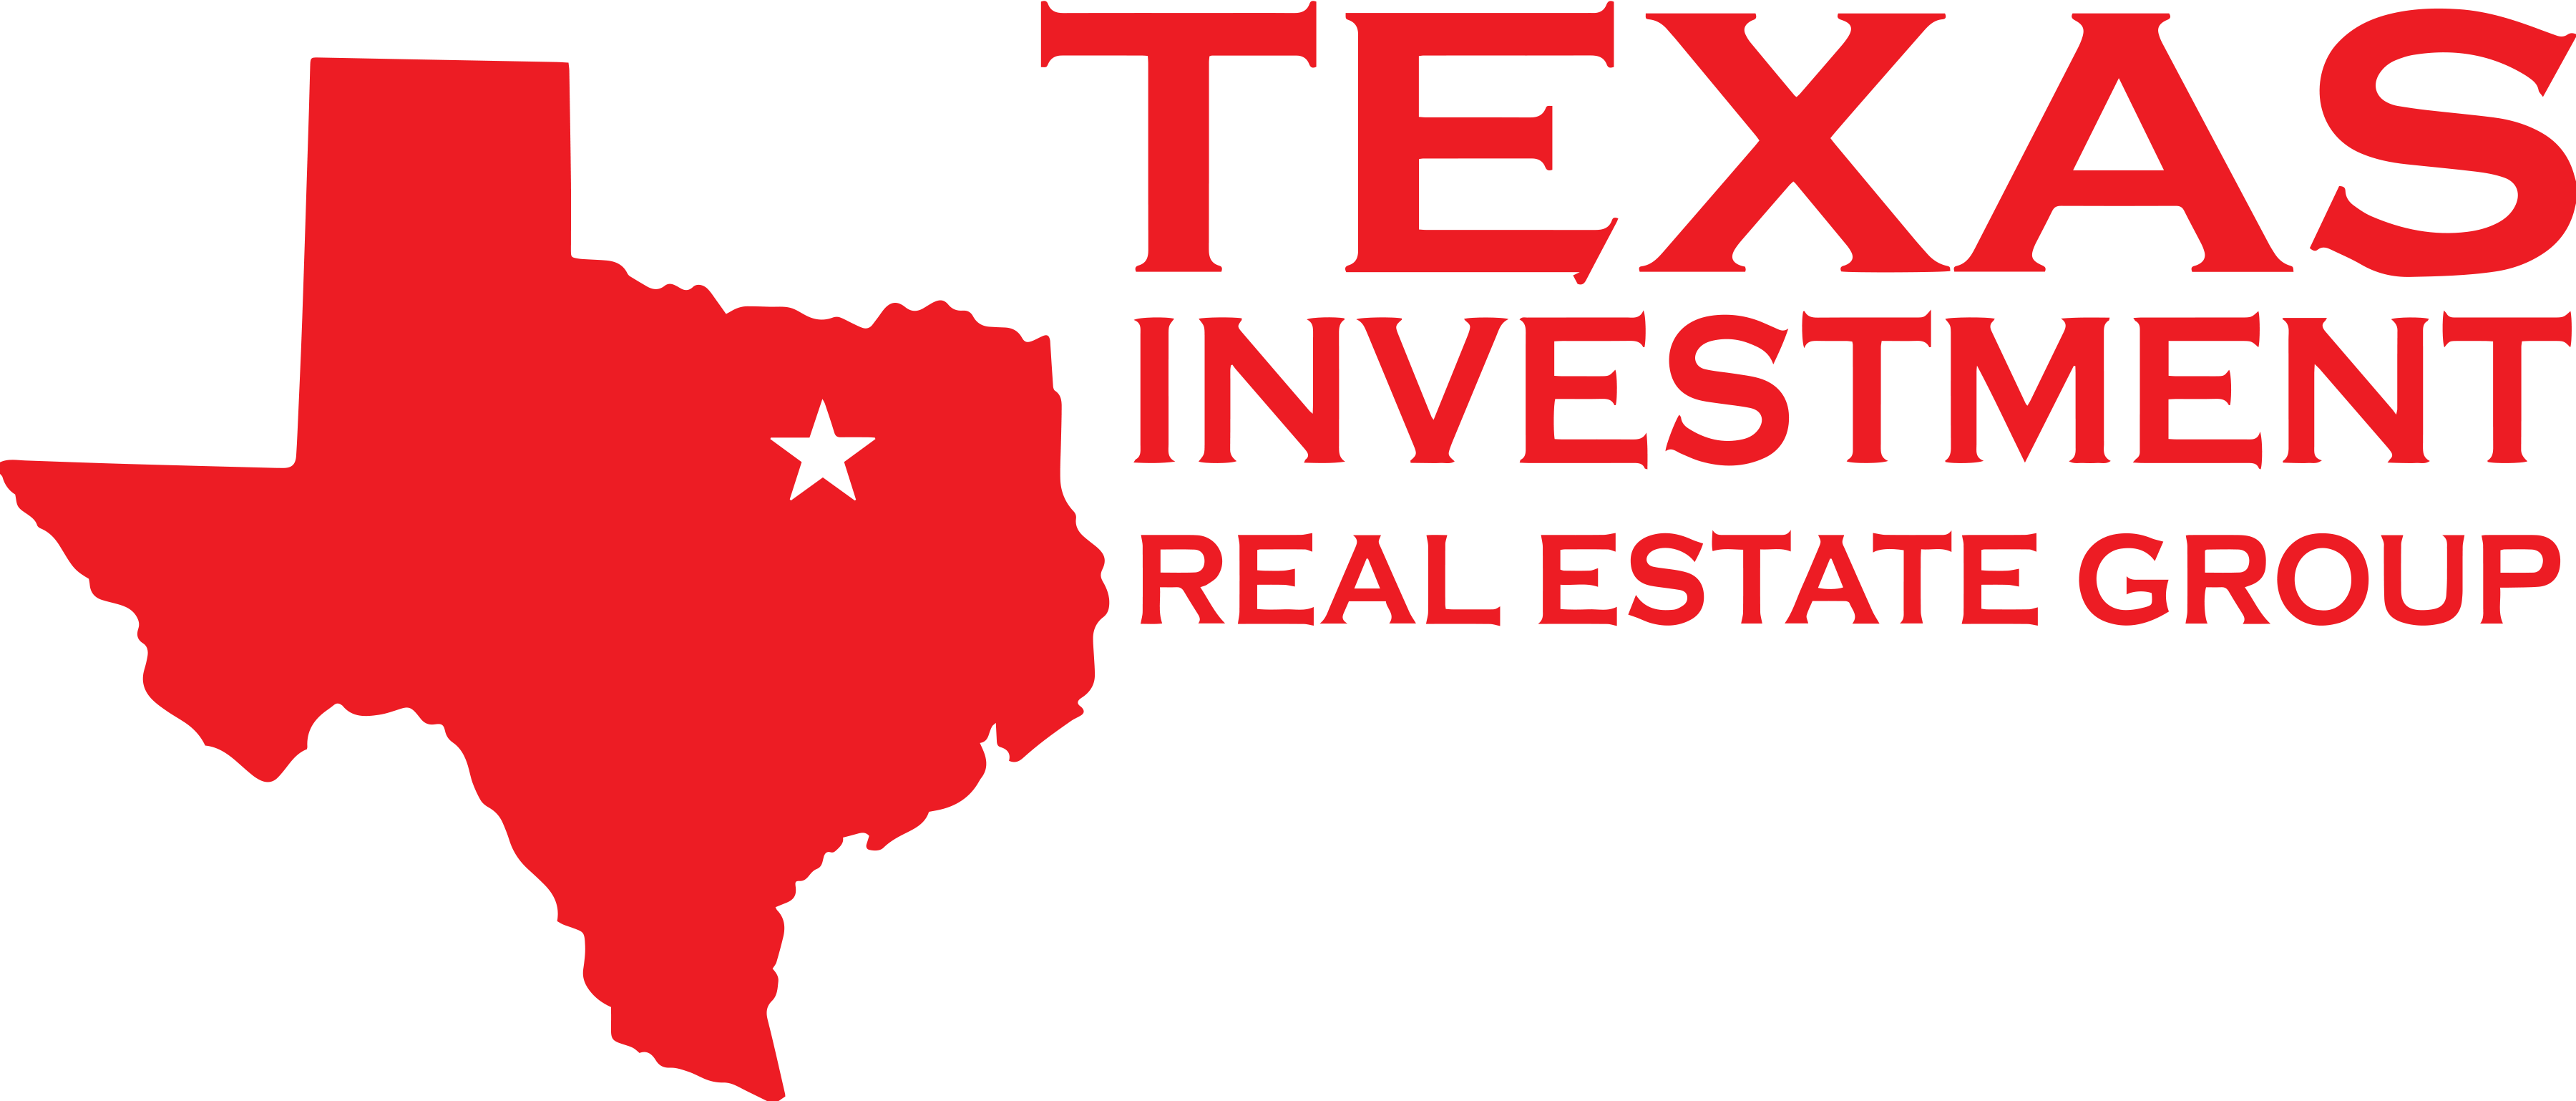 Texas Investment Real Estate Group